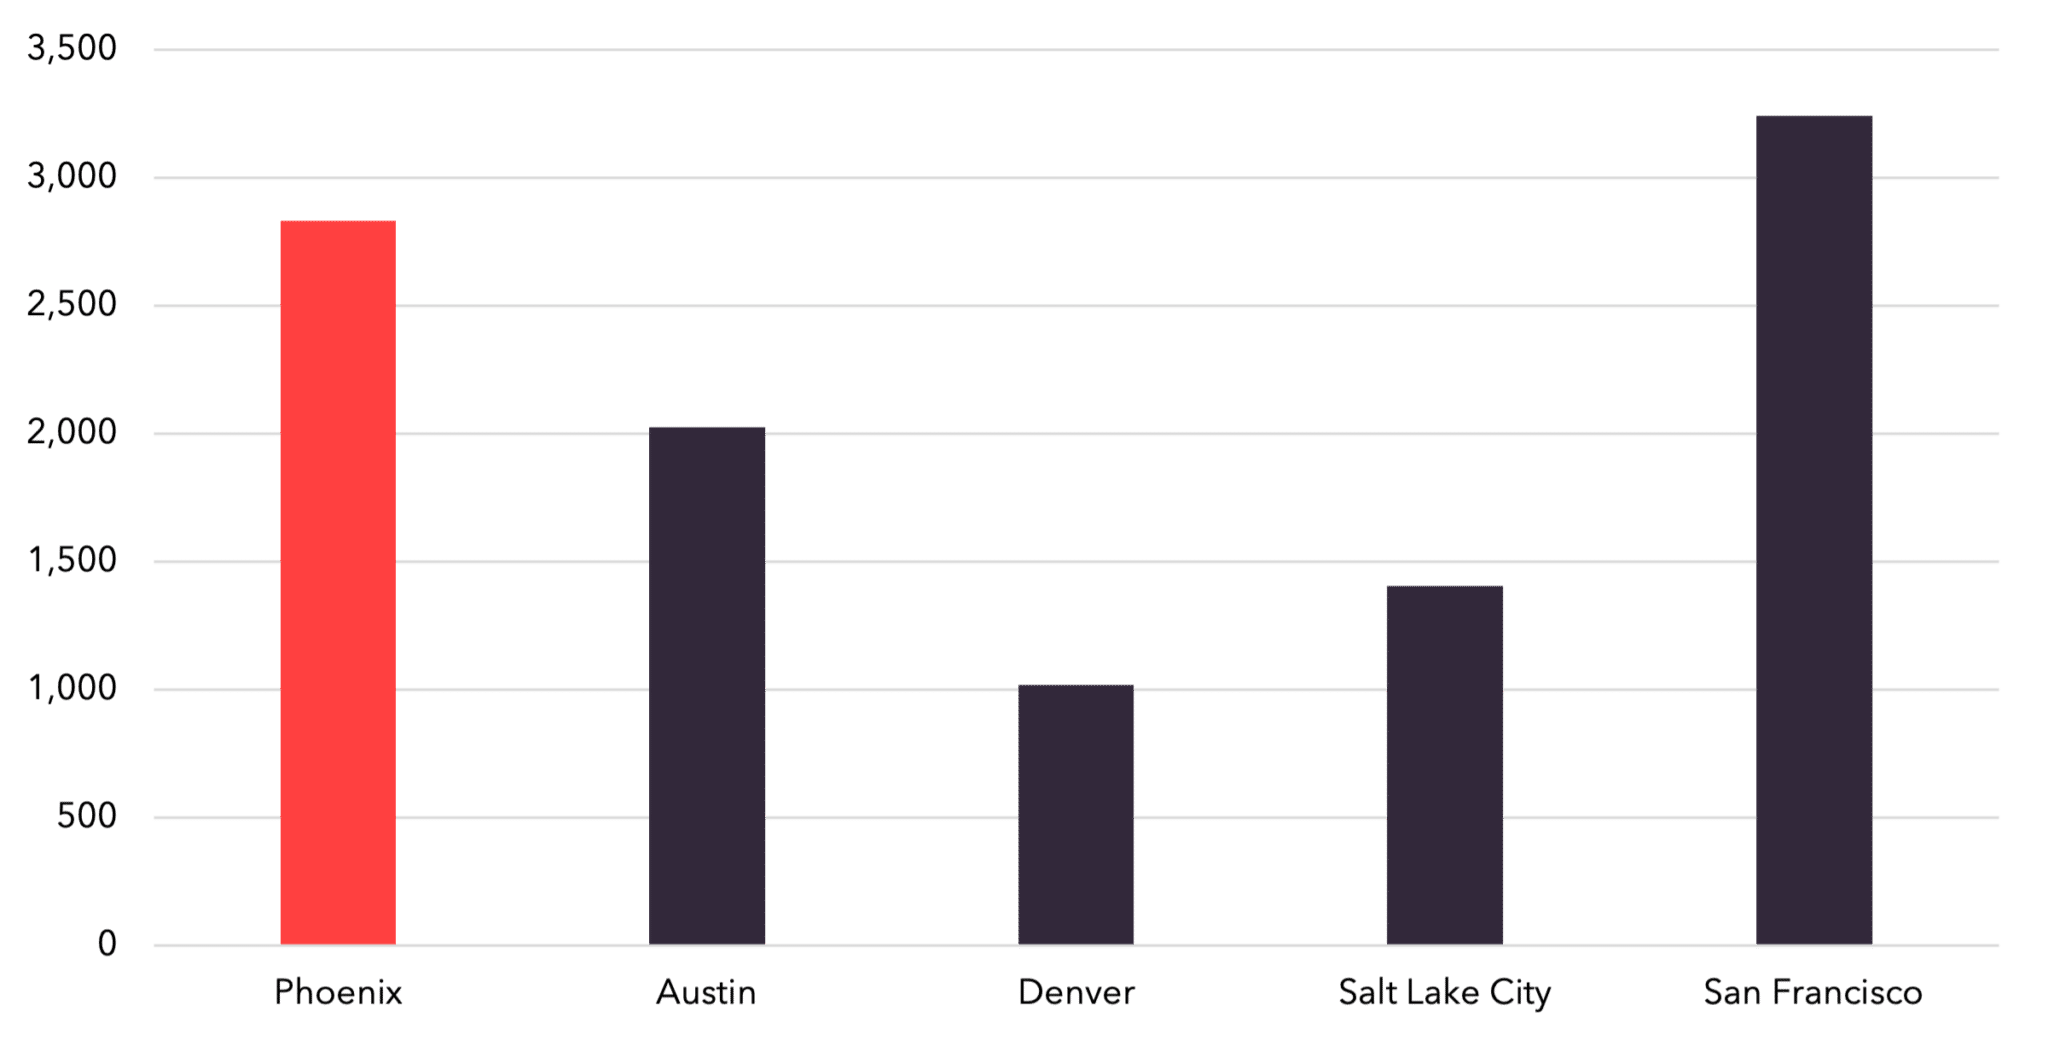 Graph that shows Software Degrees in Phoenix, Austin, Denver, SLC and SF